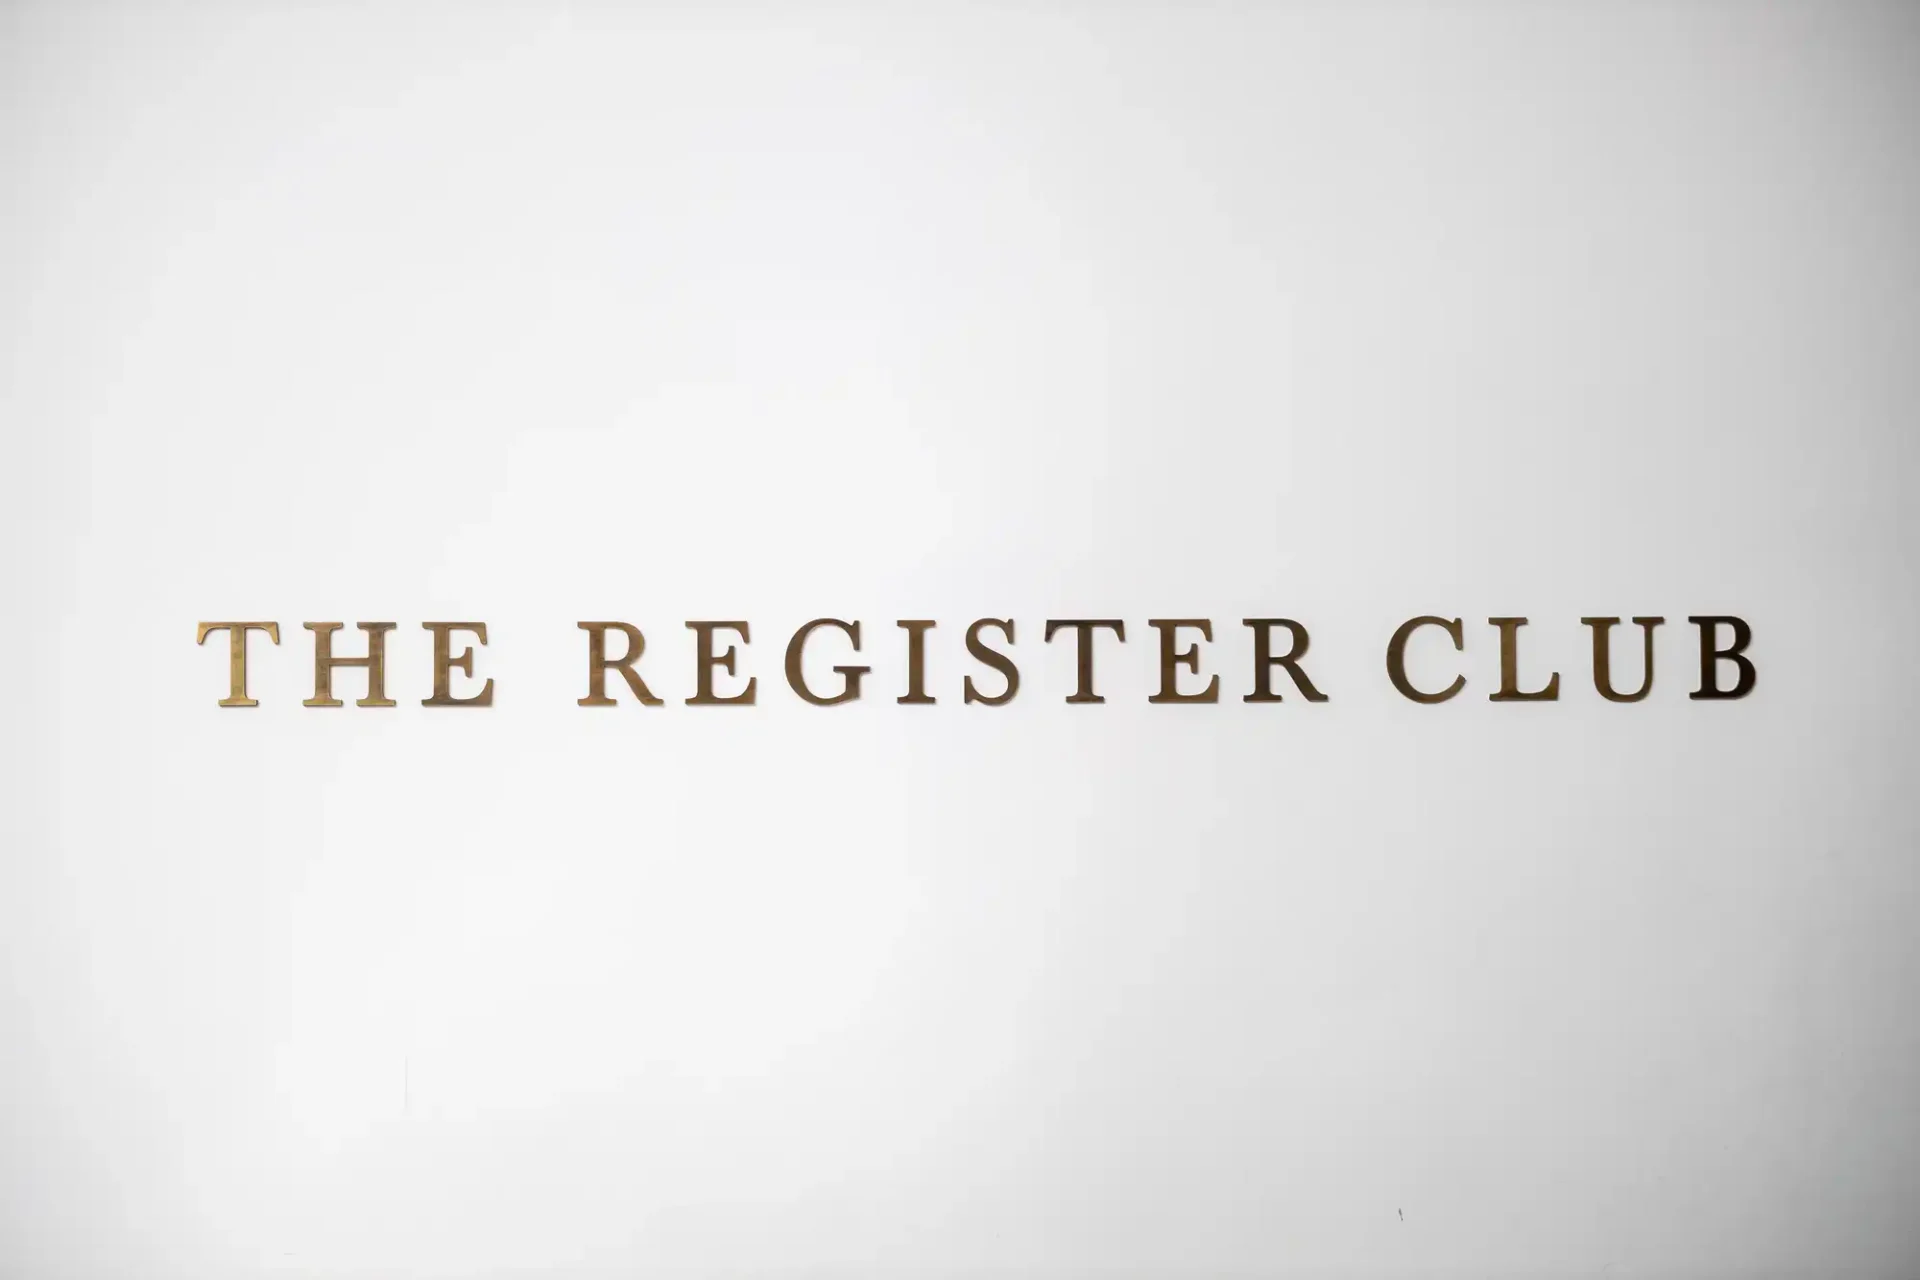 Text reading "the register club" in elegant gold letters on a white background.